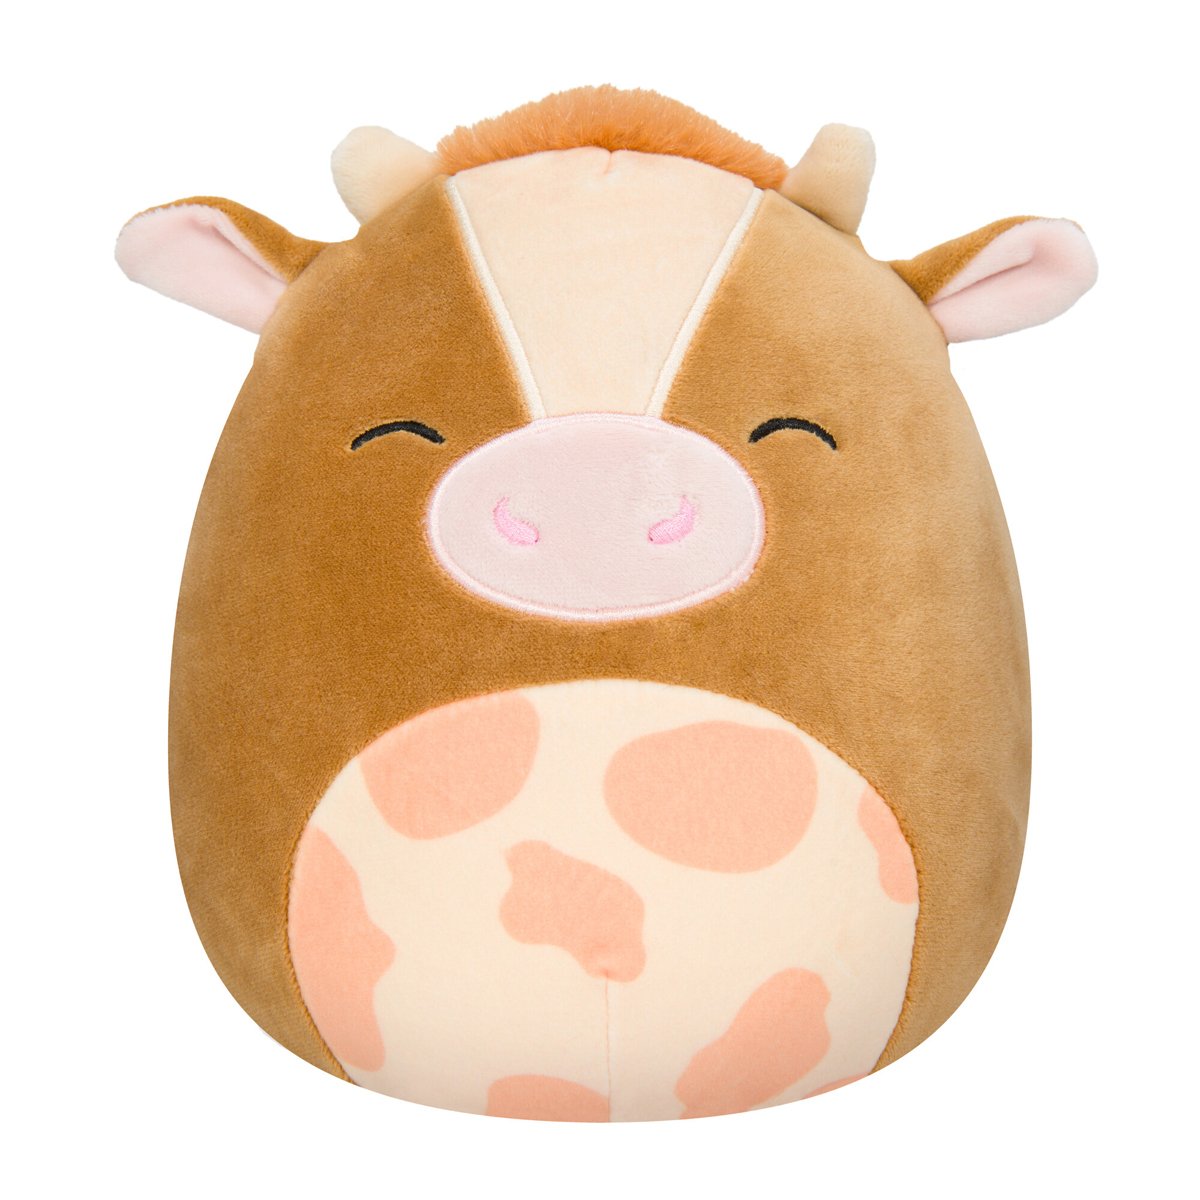 Personlised Squishmallows Nassim the Cow 7.5"